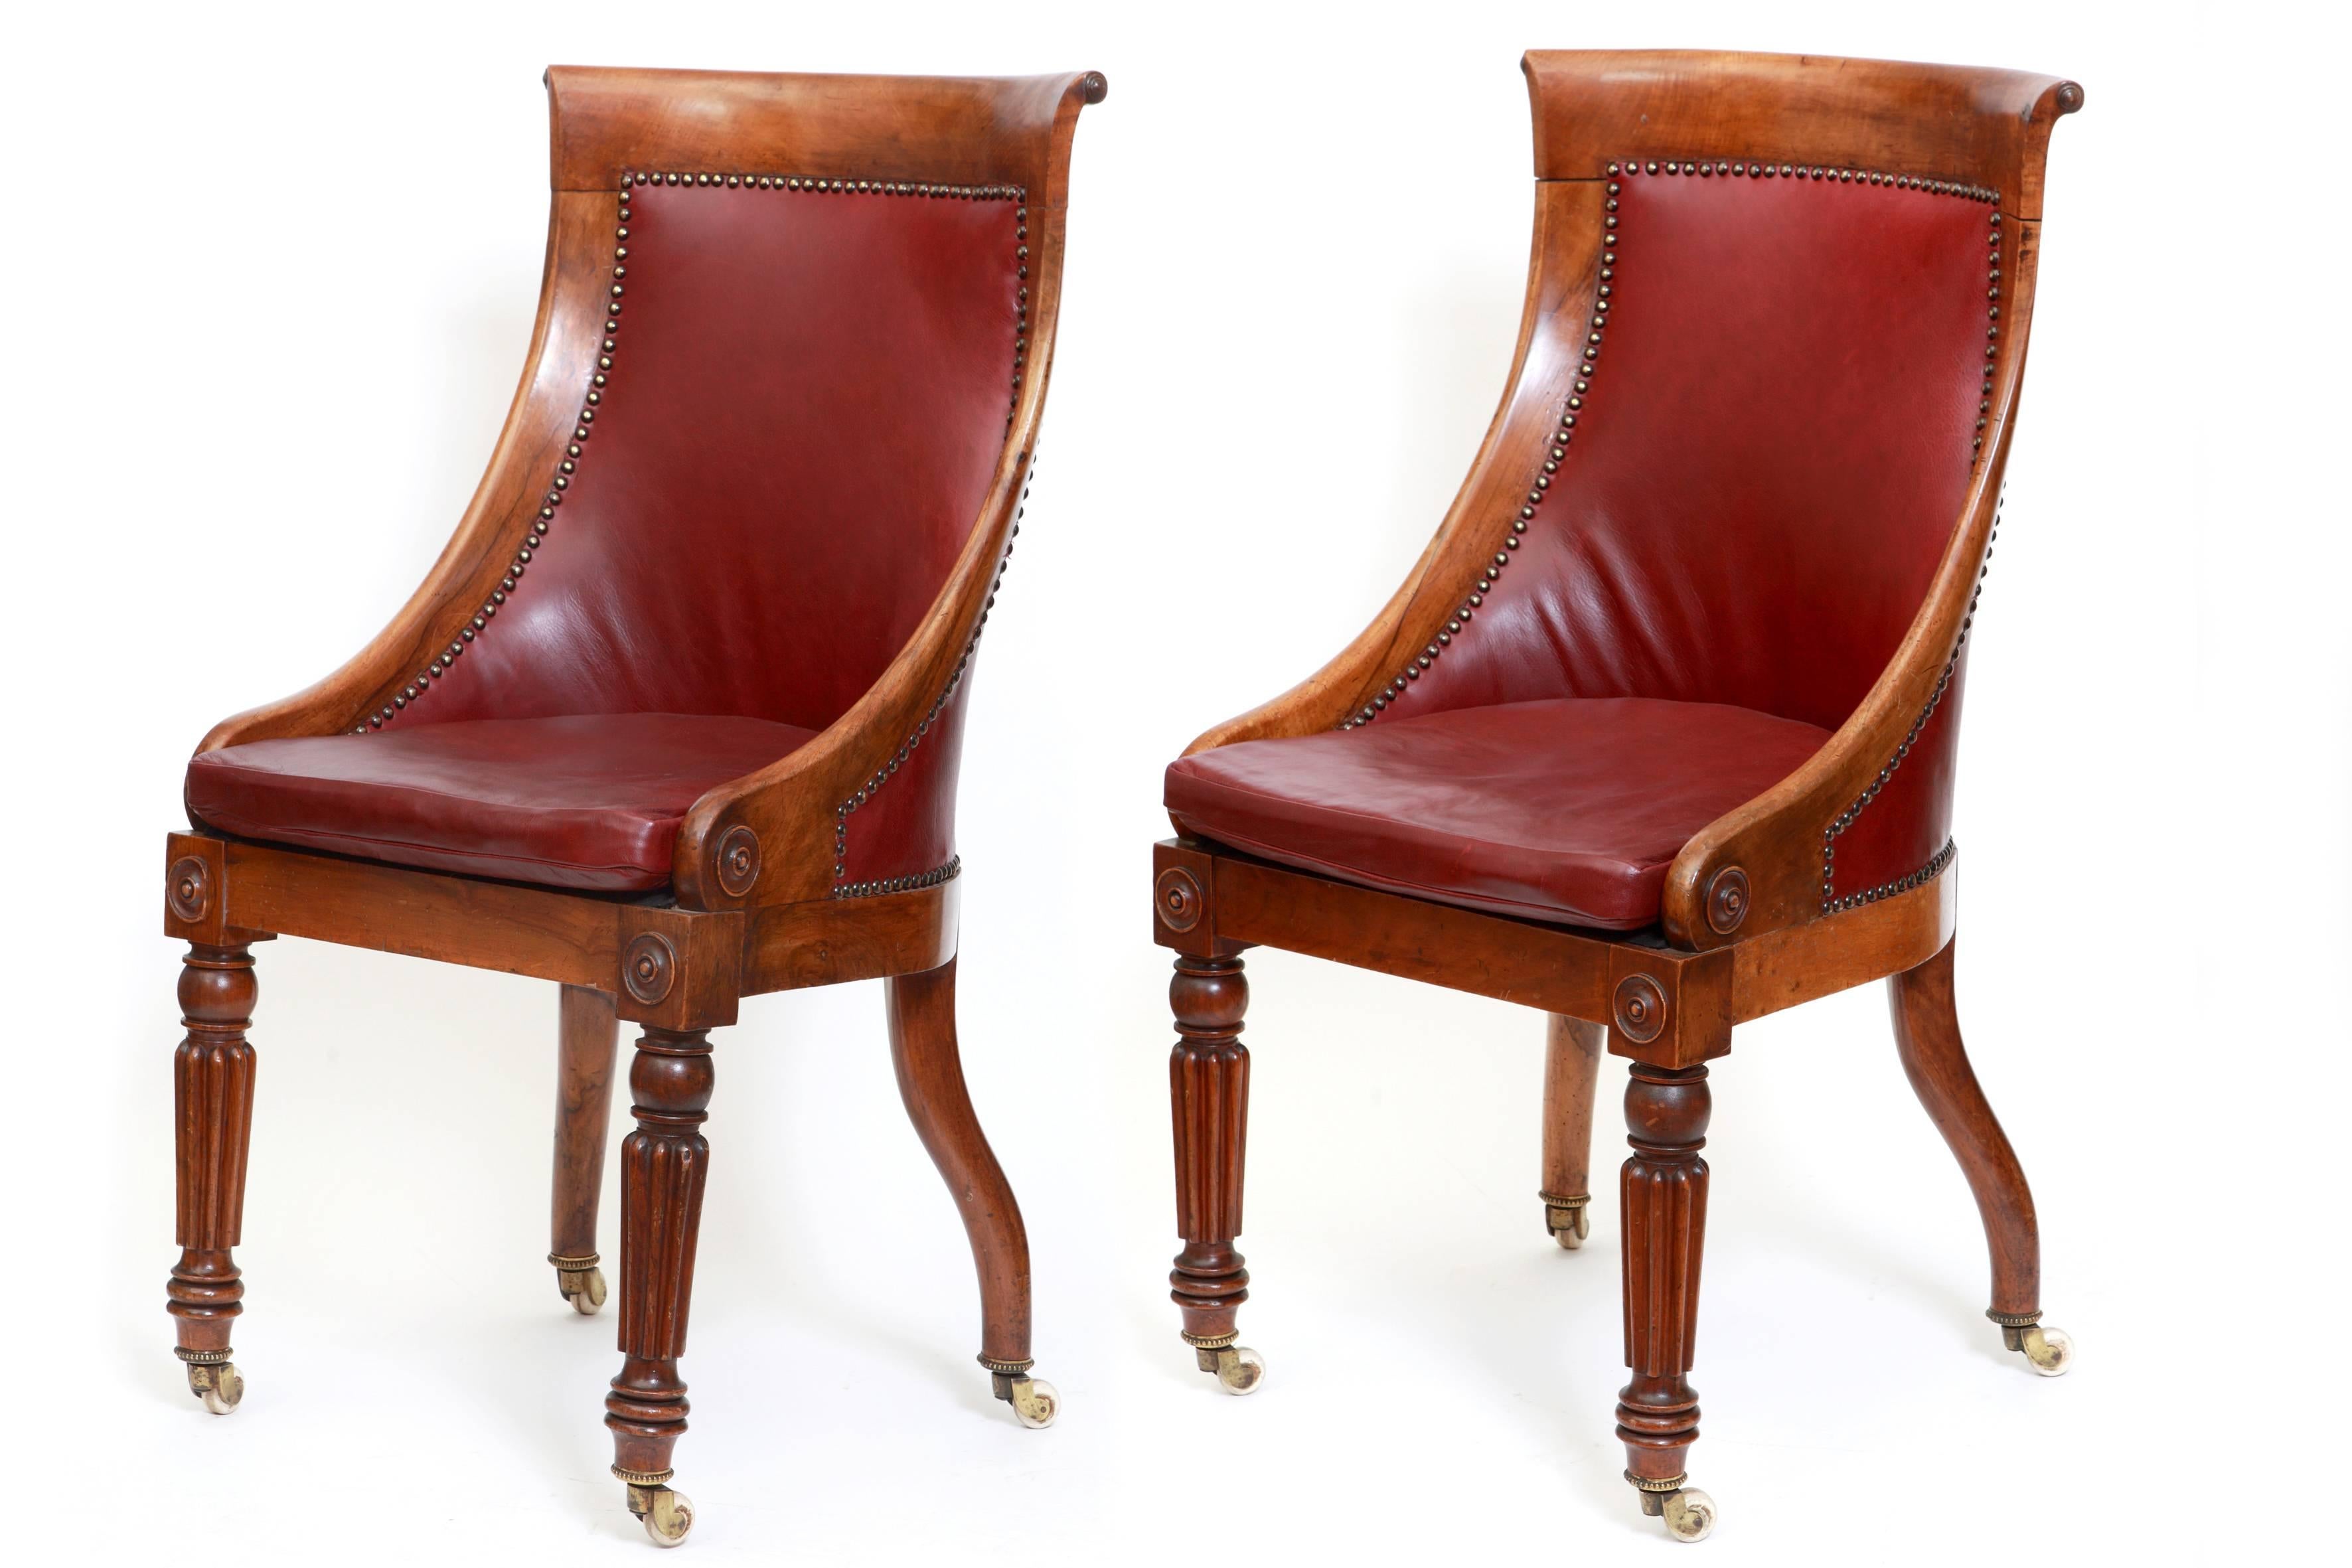 These William IV bergeres have a spoonback form and the carved, fluted tapering legs rest on ceramic castors. The red upholstery of the back and the seat have a spiked border.

Rosewood, red leather, ceramic, spikes
H 95 cm; H seat 47 cm, W 58